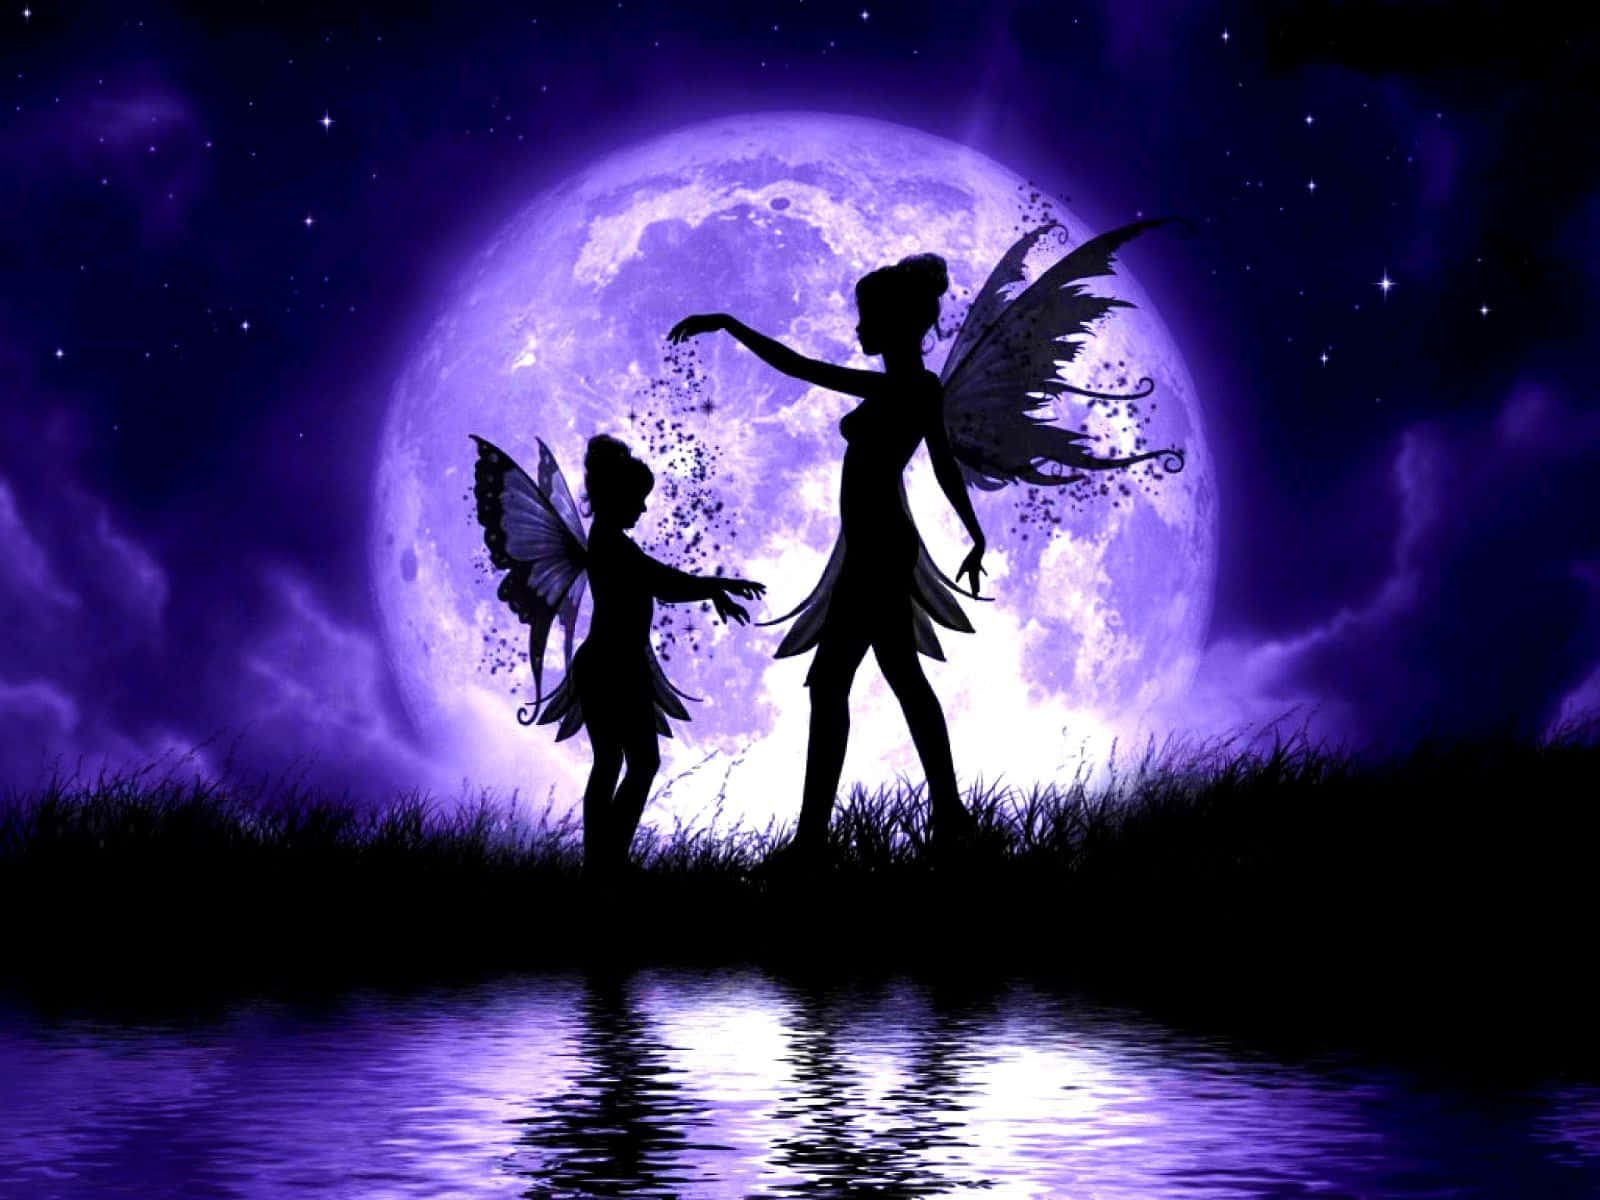 two fairy silhouettes standing in front of a full moon